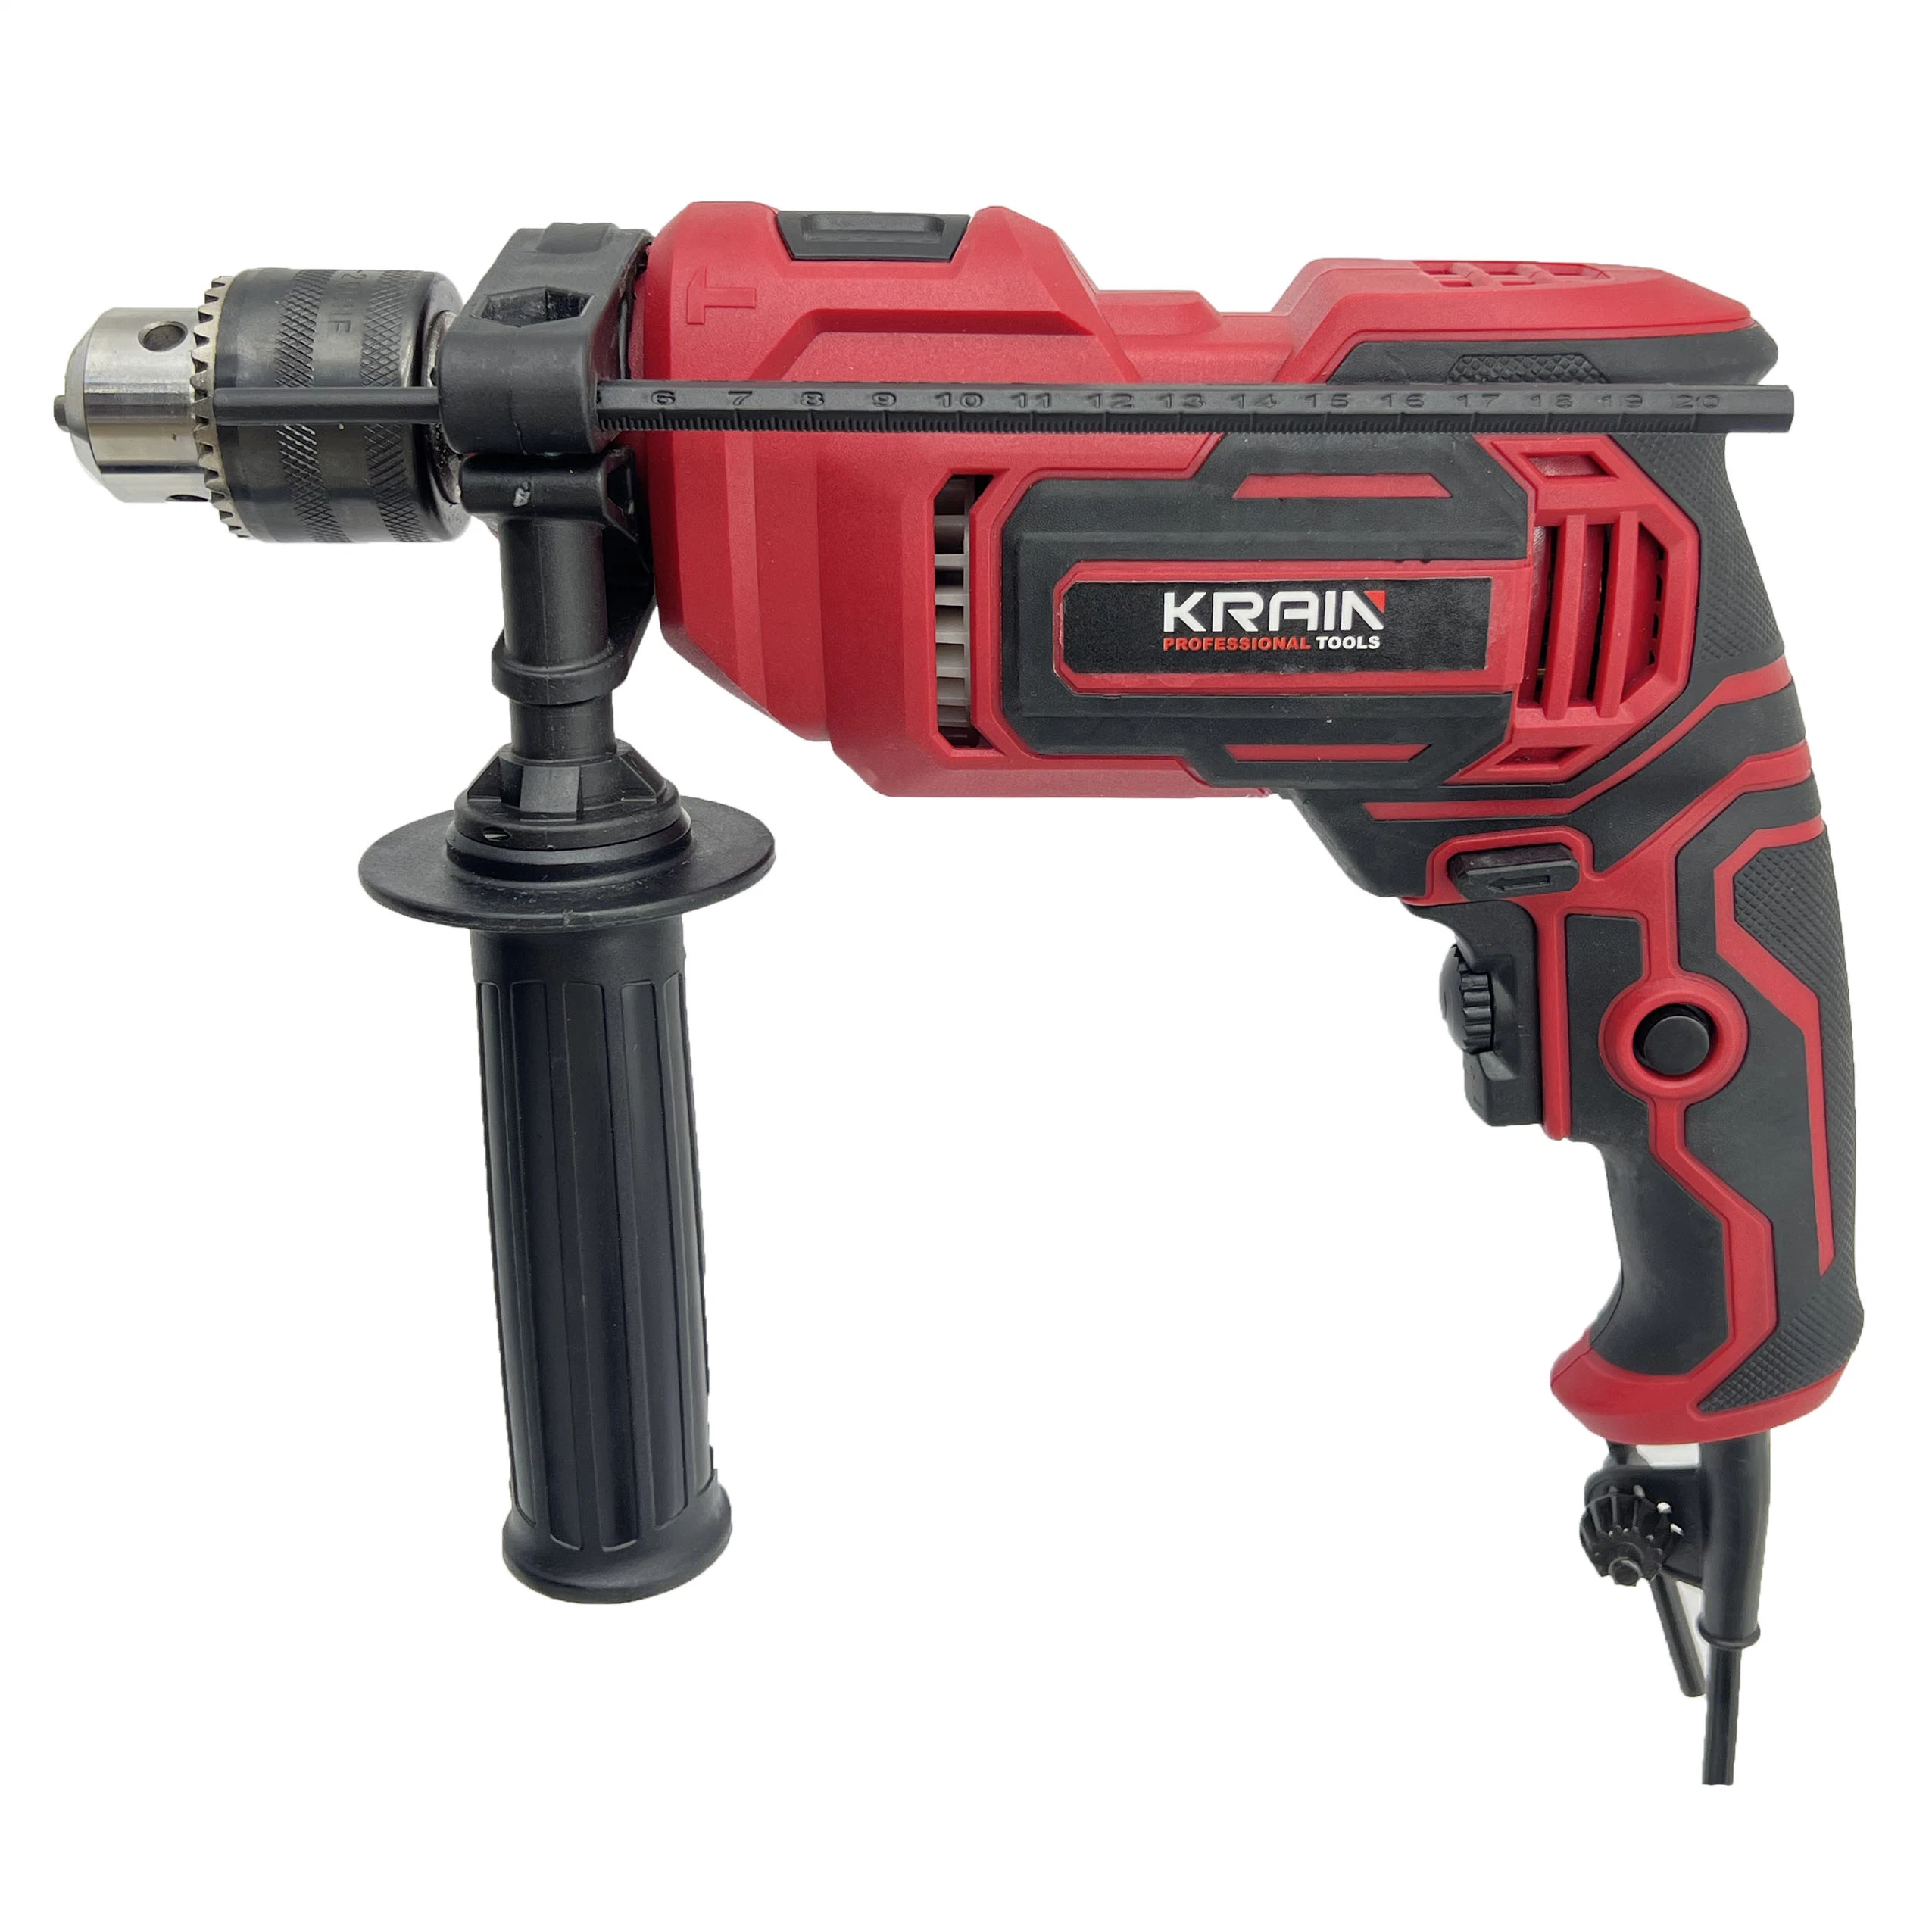 Hot 710W 13mm Impact Drill New Drilling Machine Electric Power Tool Drill